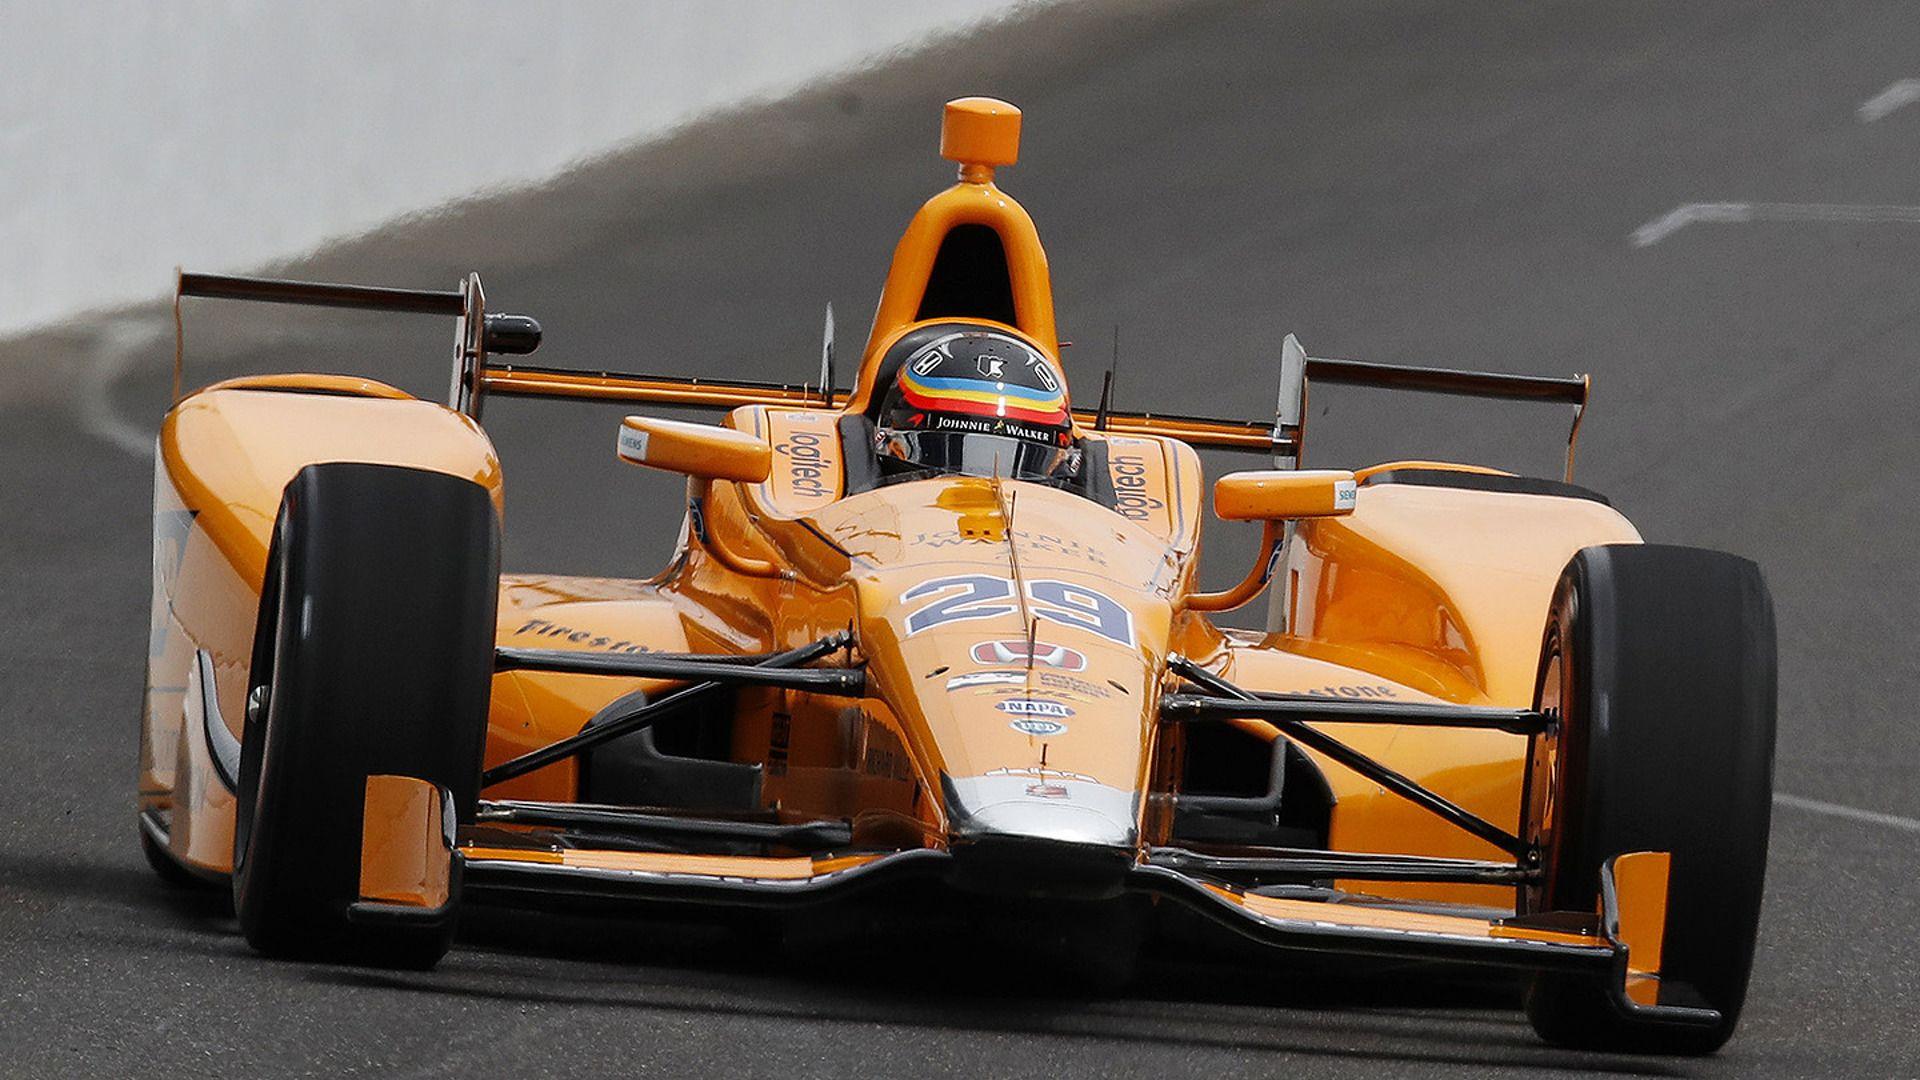 Fernando Alonso To Keep Indy 500 Car After Race